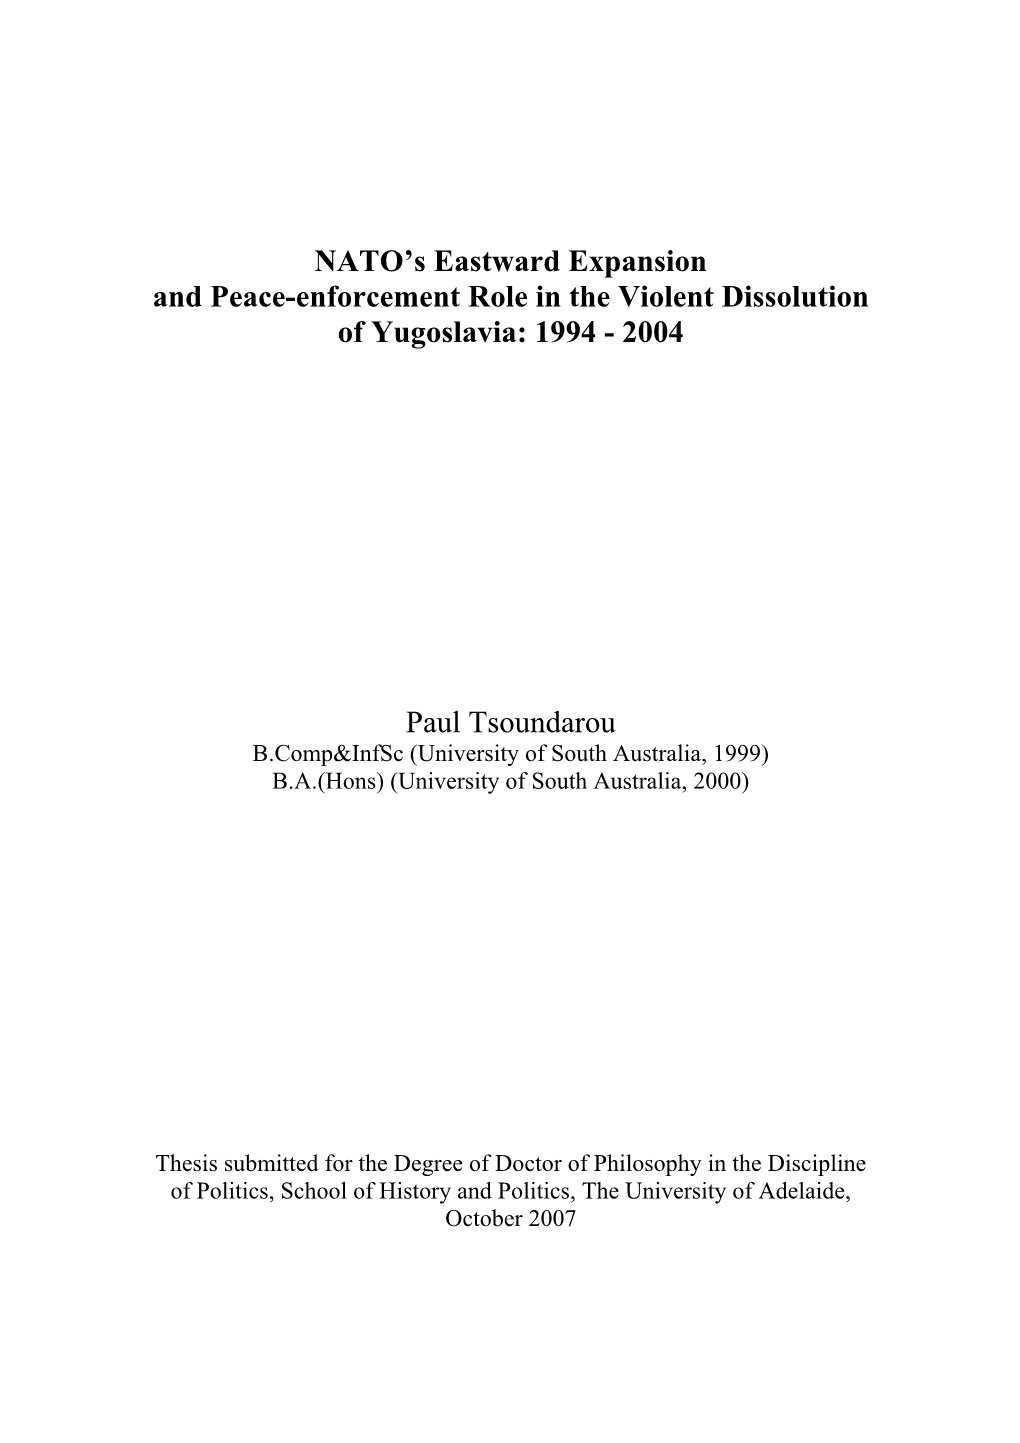 NATO's Eastward Expansion and Peace-Enforcement Role in the Violent Dissolution of Yugoslavia